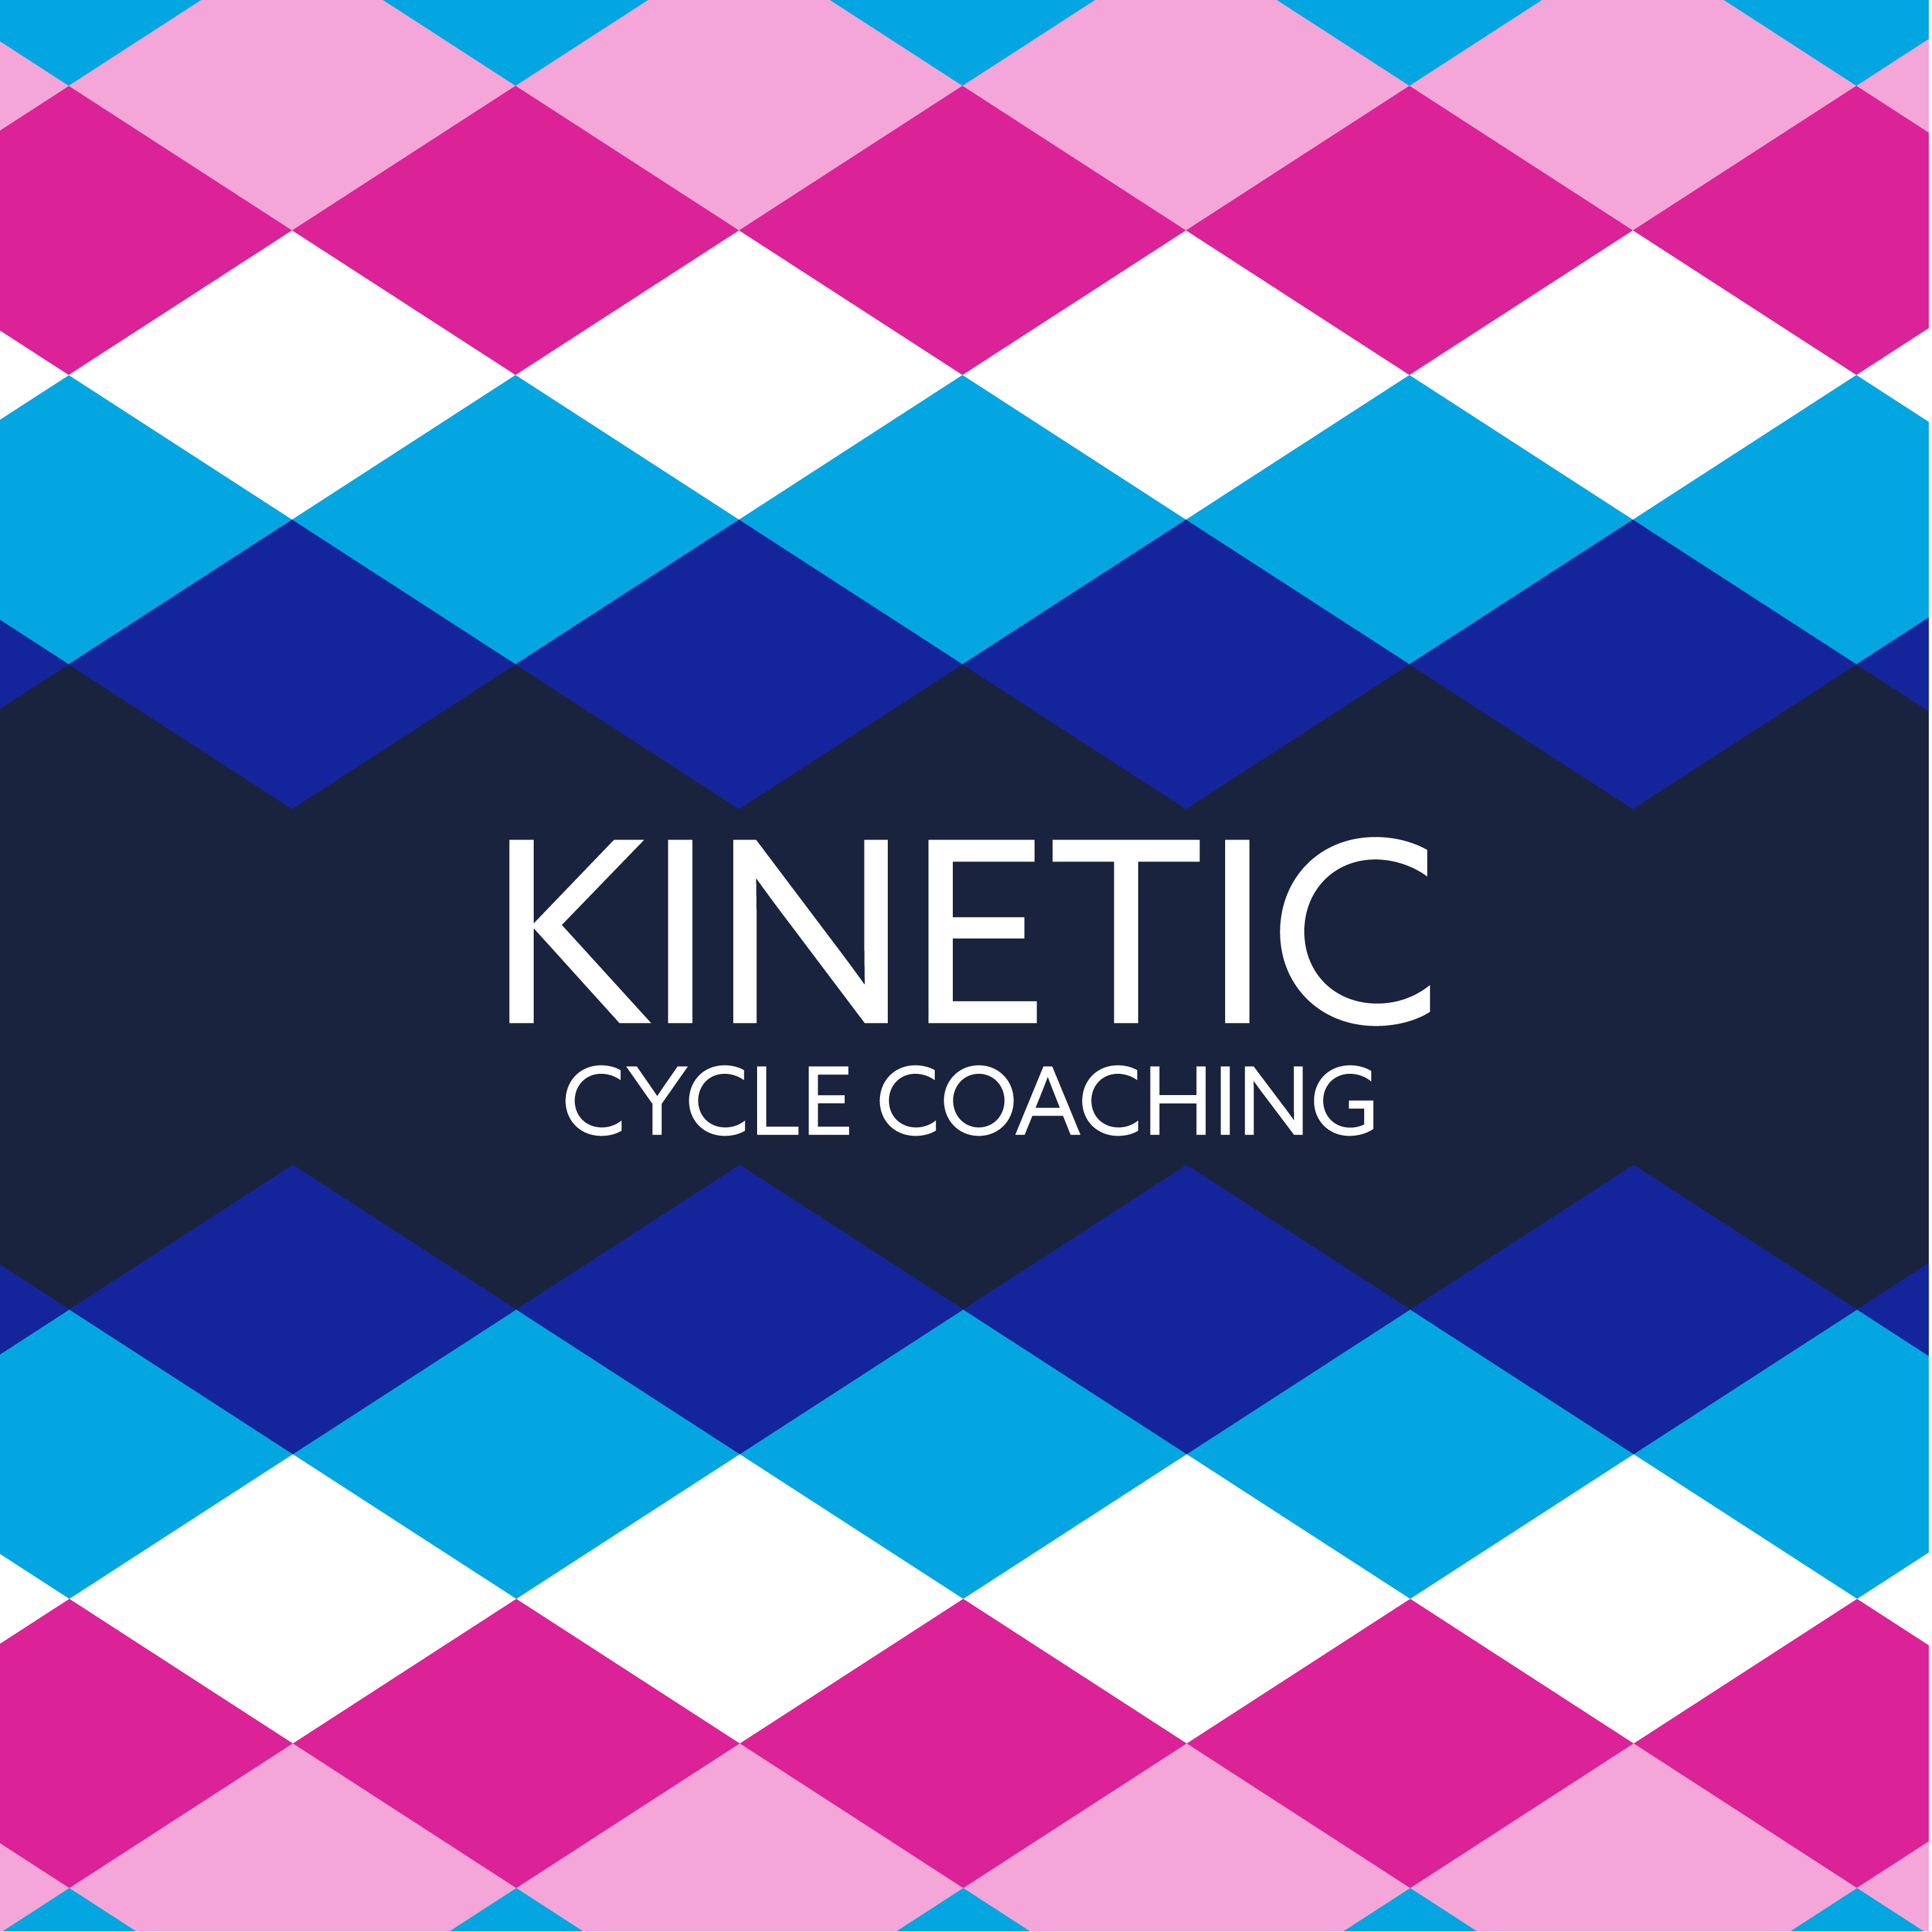 Club Image for KINETIC CYCLE COACHING